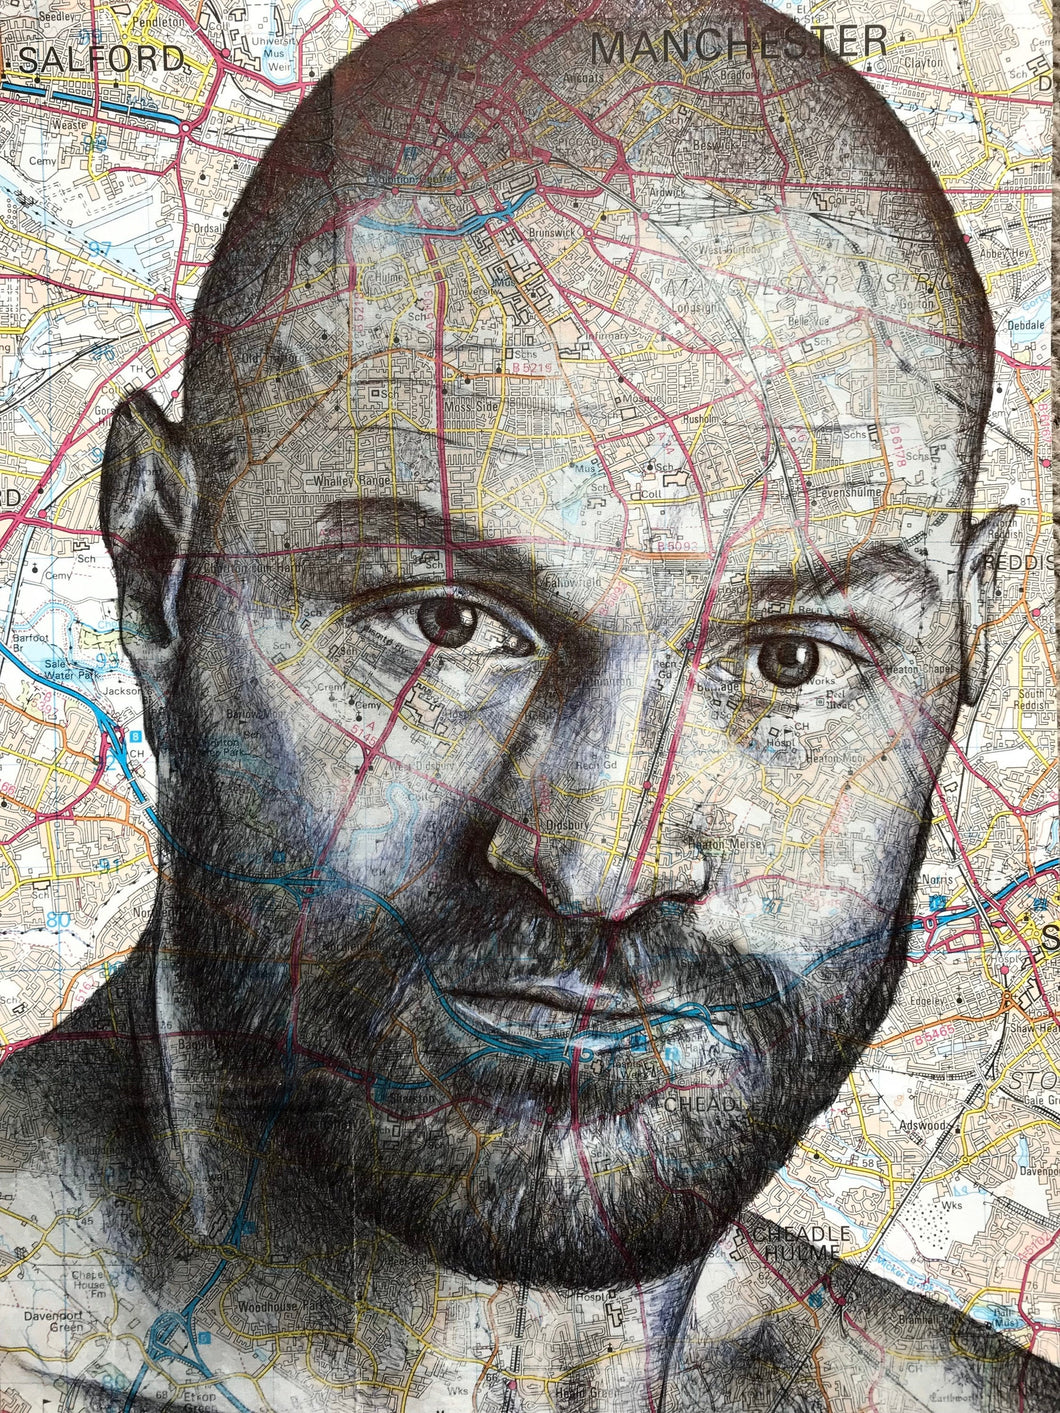 Tyson Fury; Gypsy King Art Print. Pen drawing over map of Manchester. A4 Unframed.